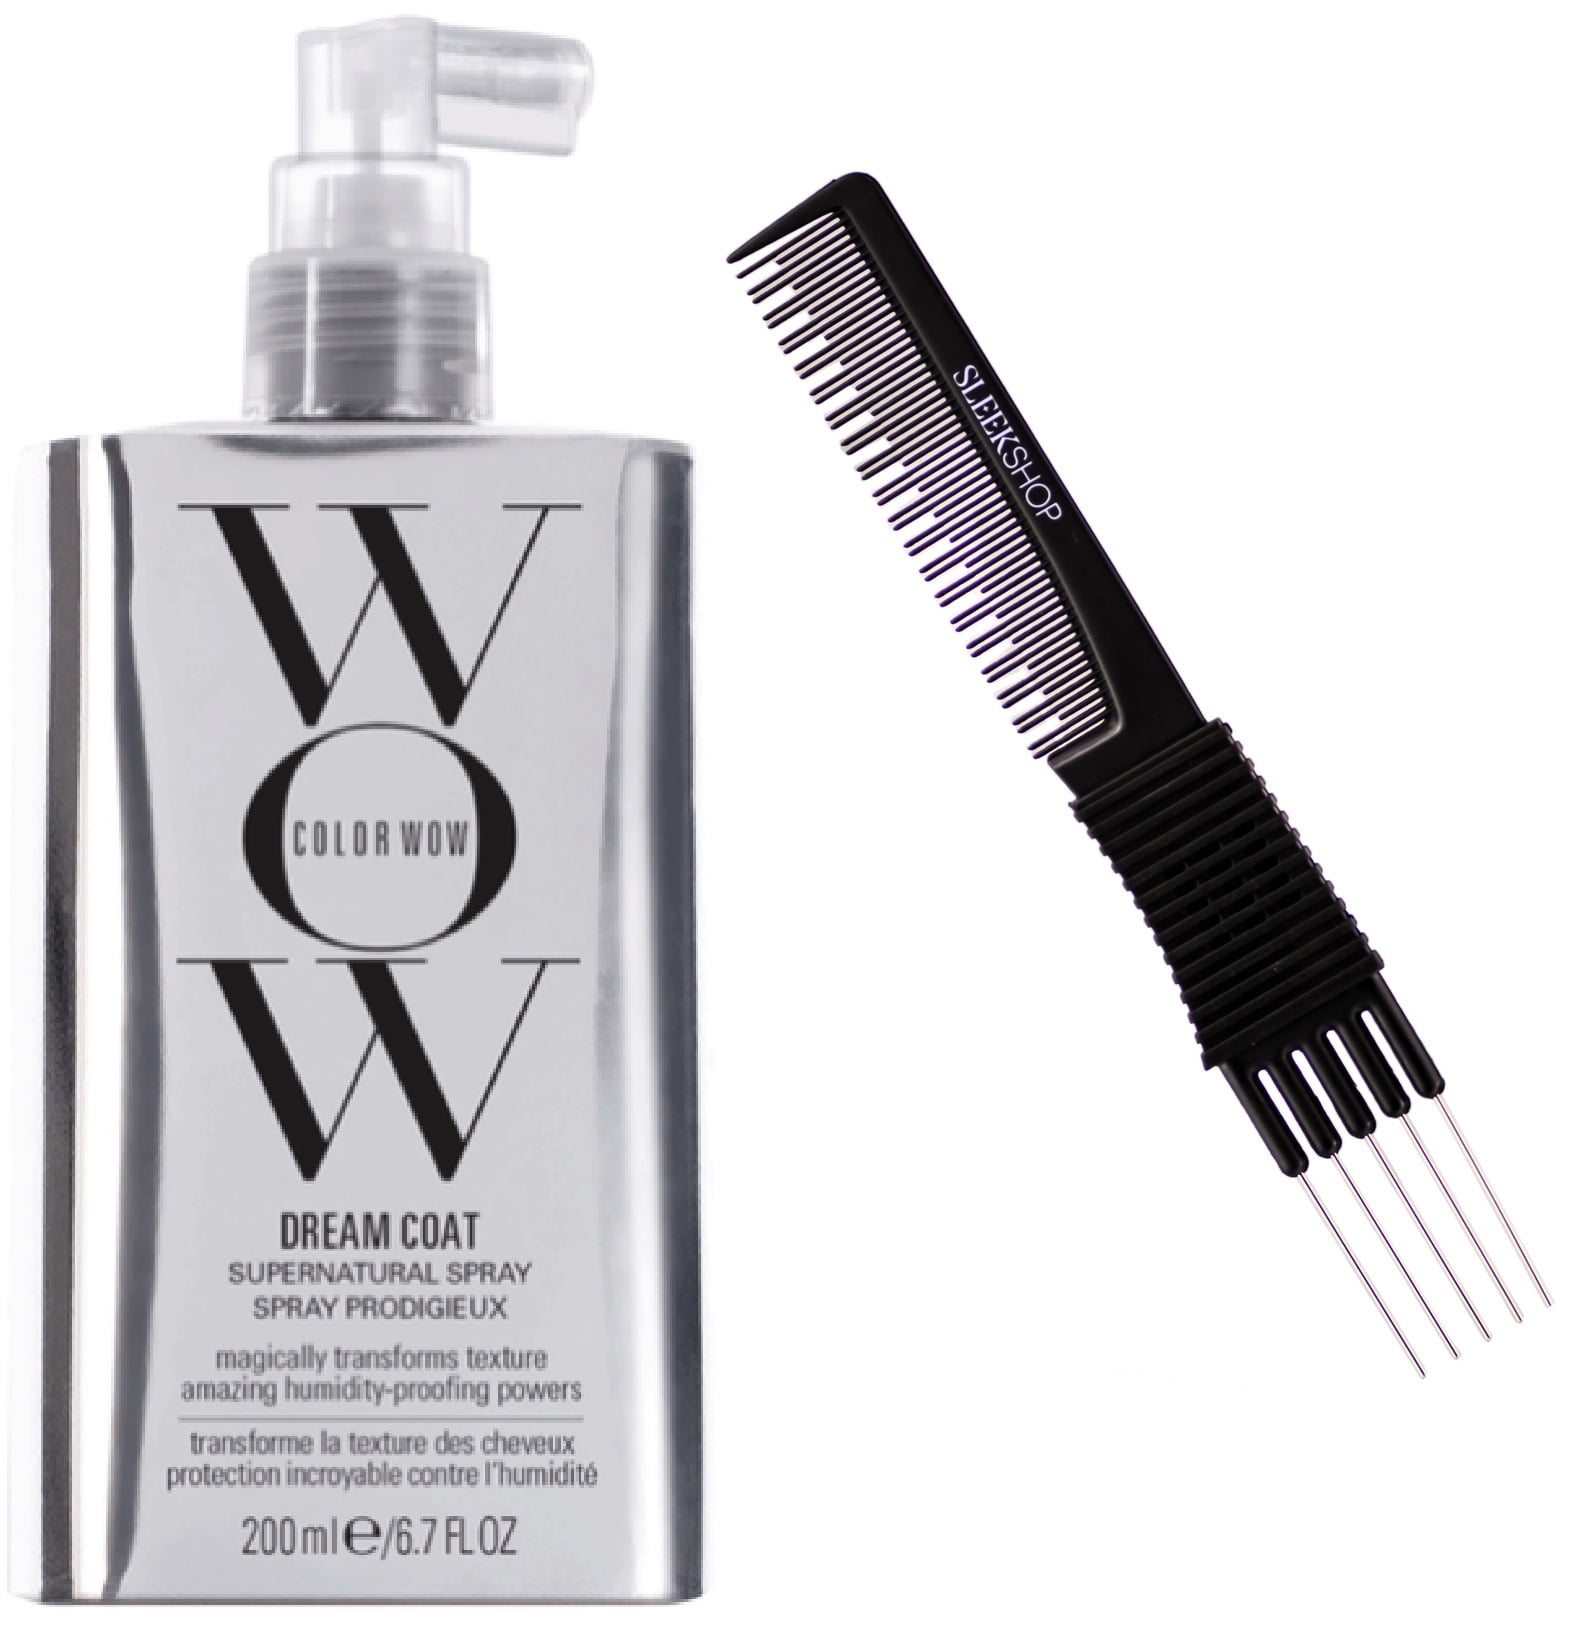 6.7 oz , Color WOW Colorwow DREAM COAT Supernatural Spray, Magically  Transforms Hair Texture, Anti-Frizz Humidity Proofing - Pack of 2 w/  SLEEKSHOP Teasing Comb 